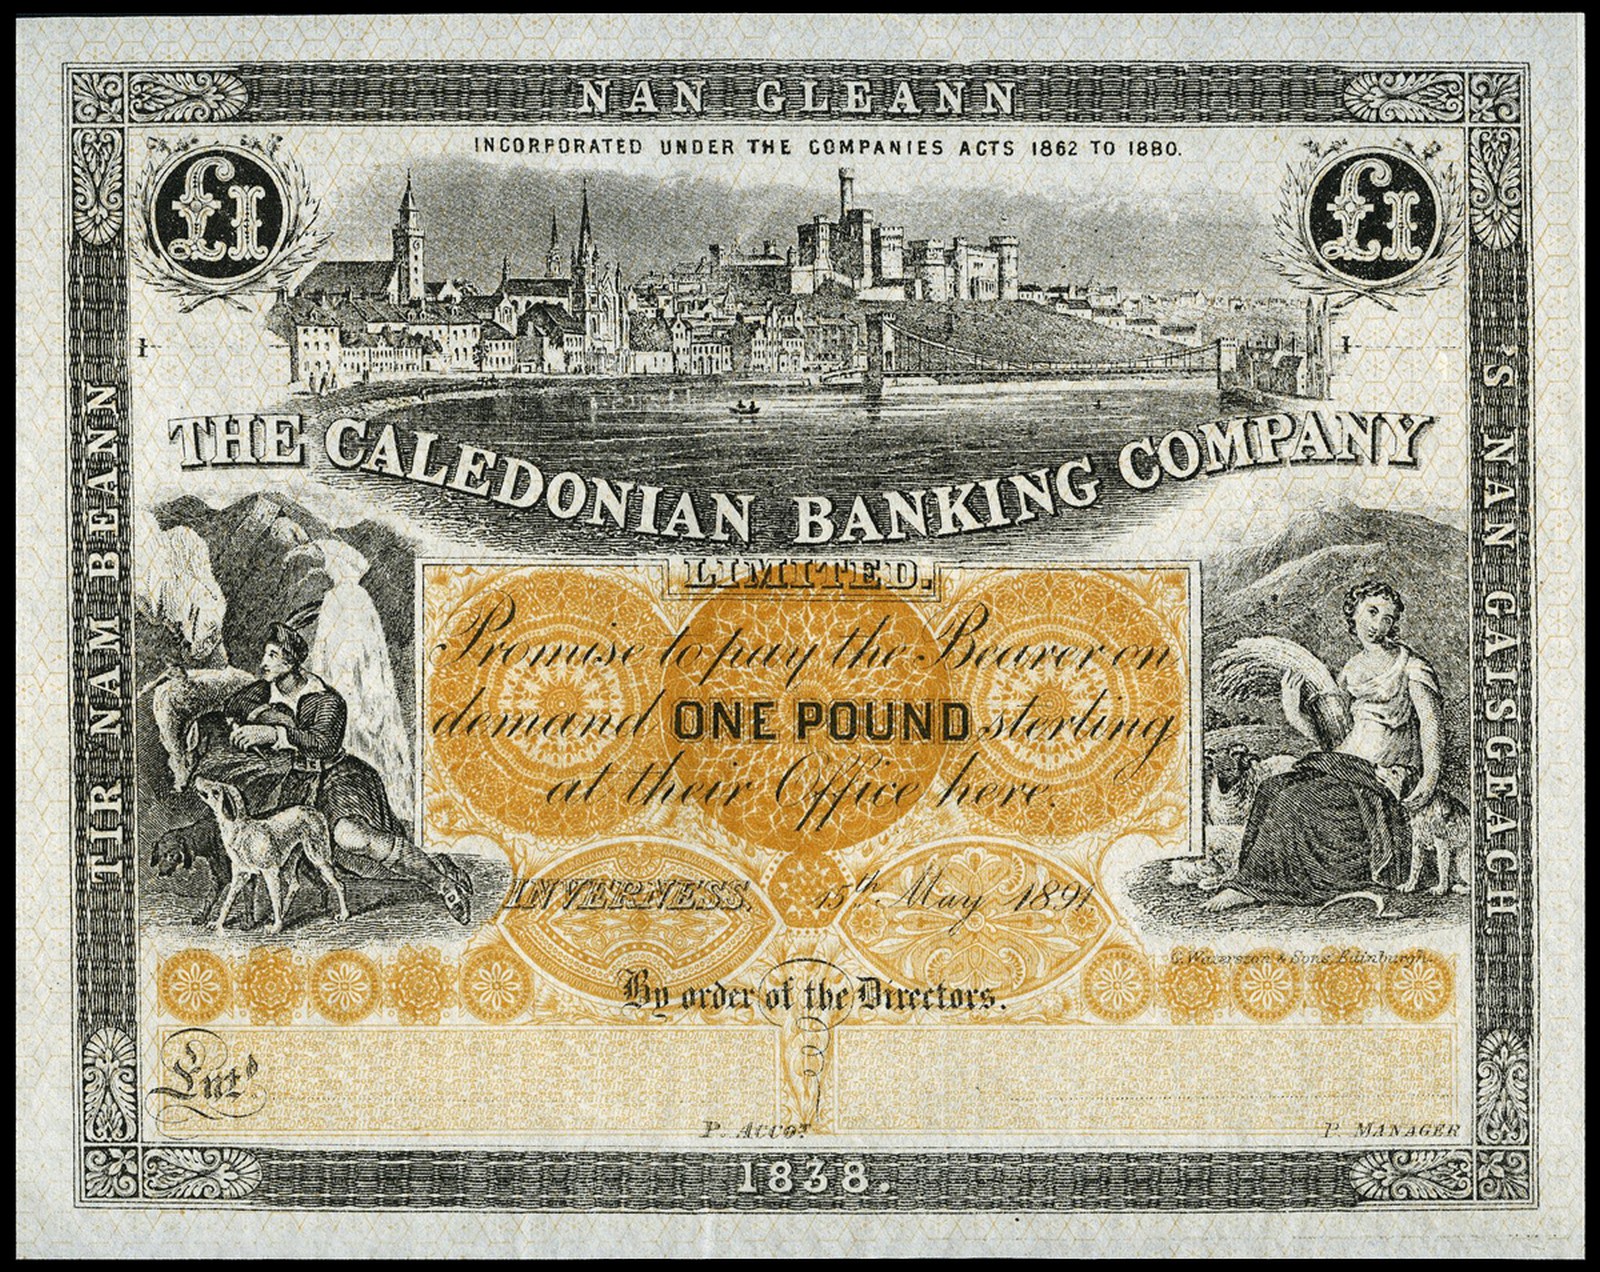 BRITISH BANKNOTES, The Caledonian Banking Co, One Pound, 15 May 1891, unissued (Douglas 17). Good